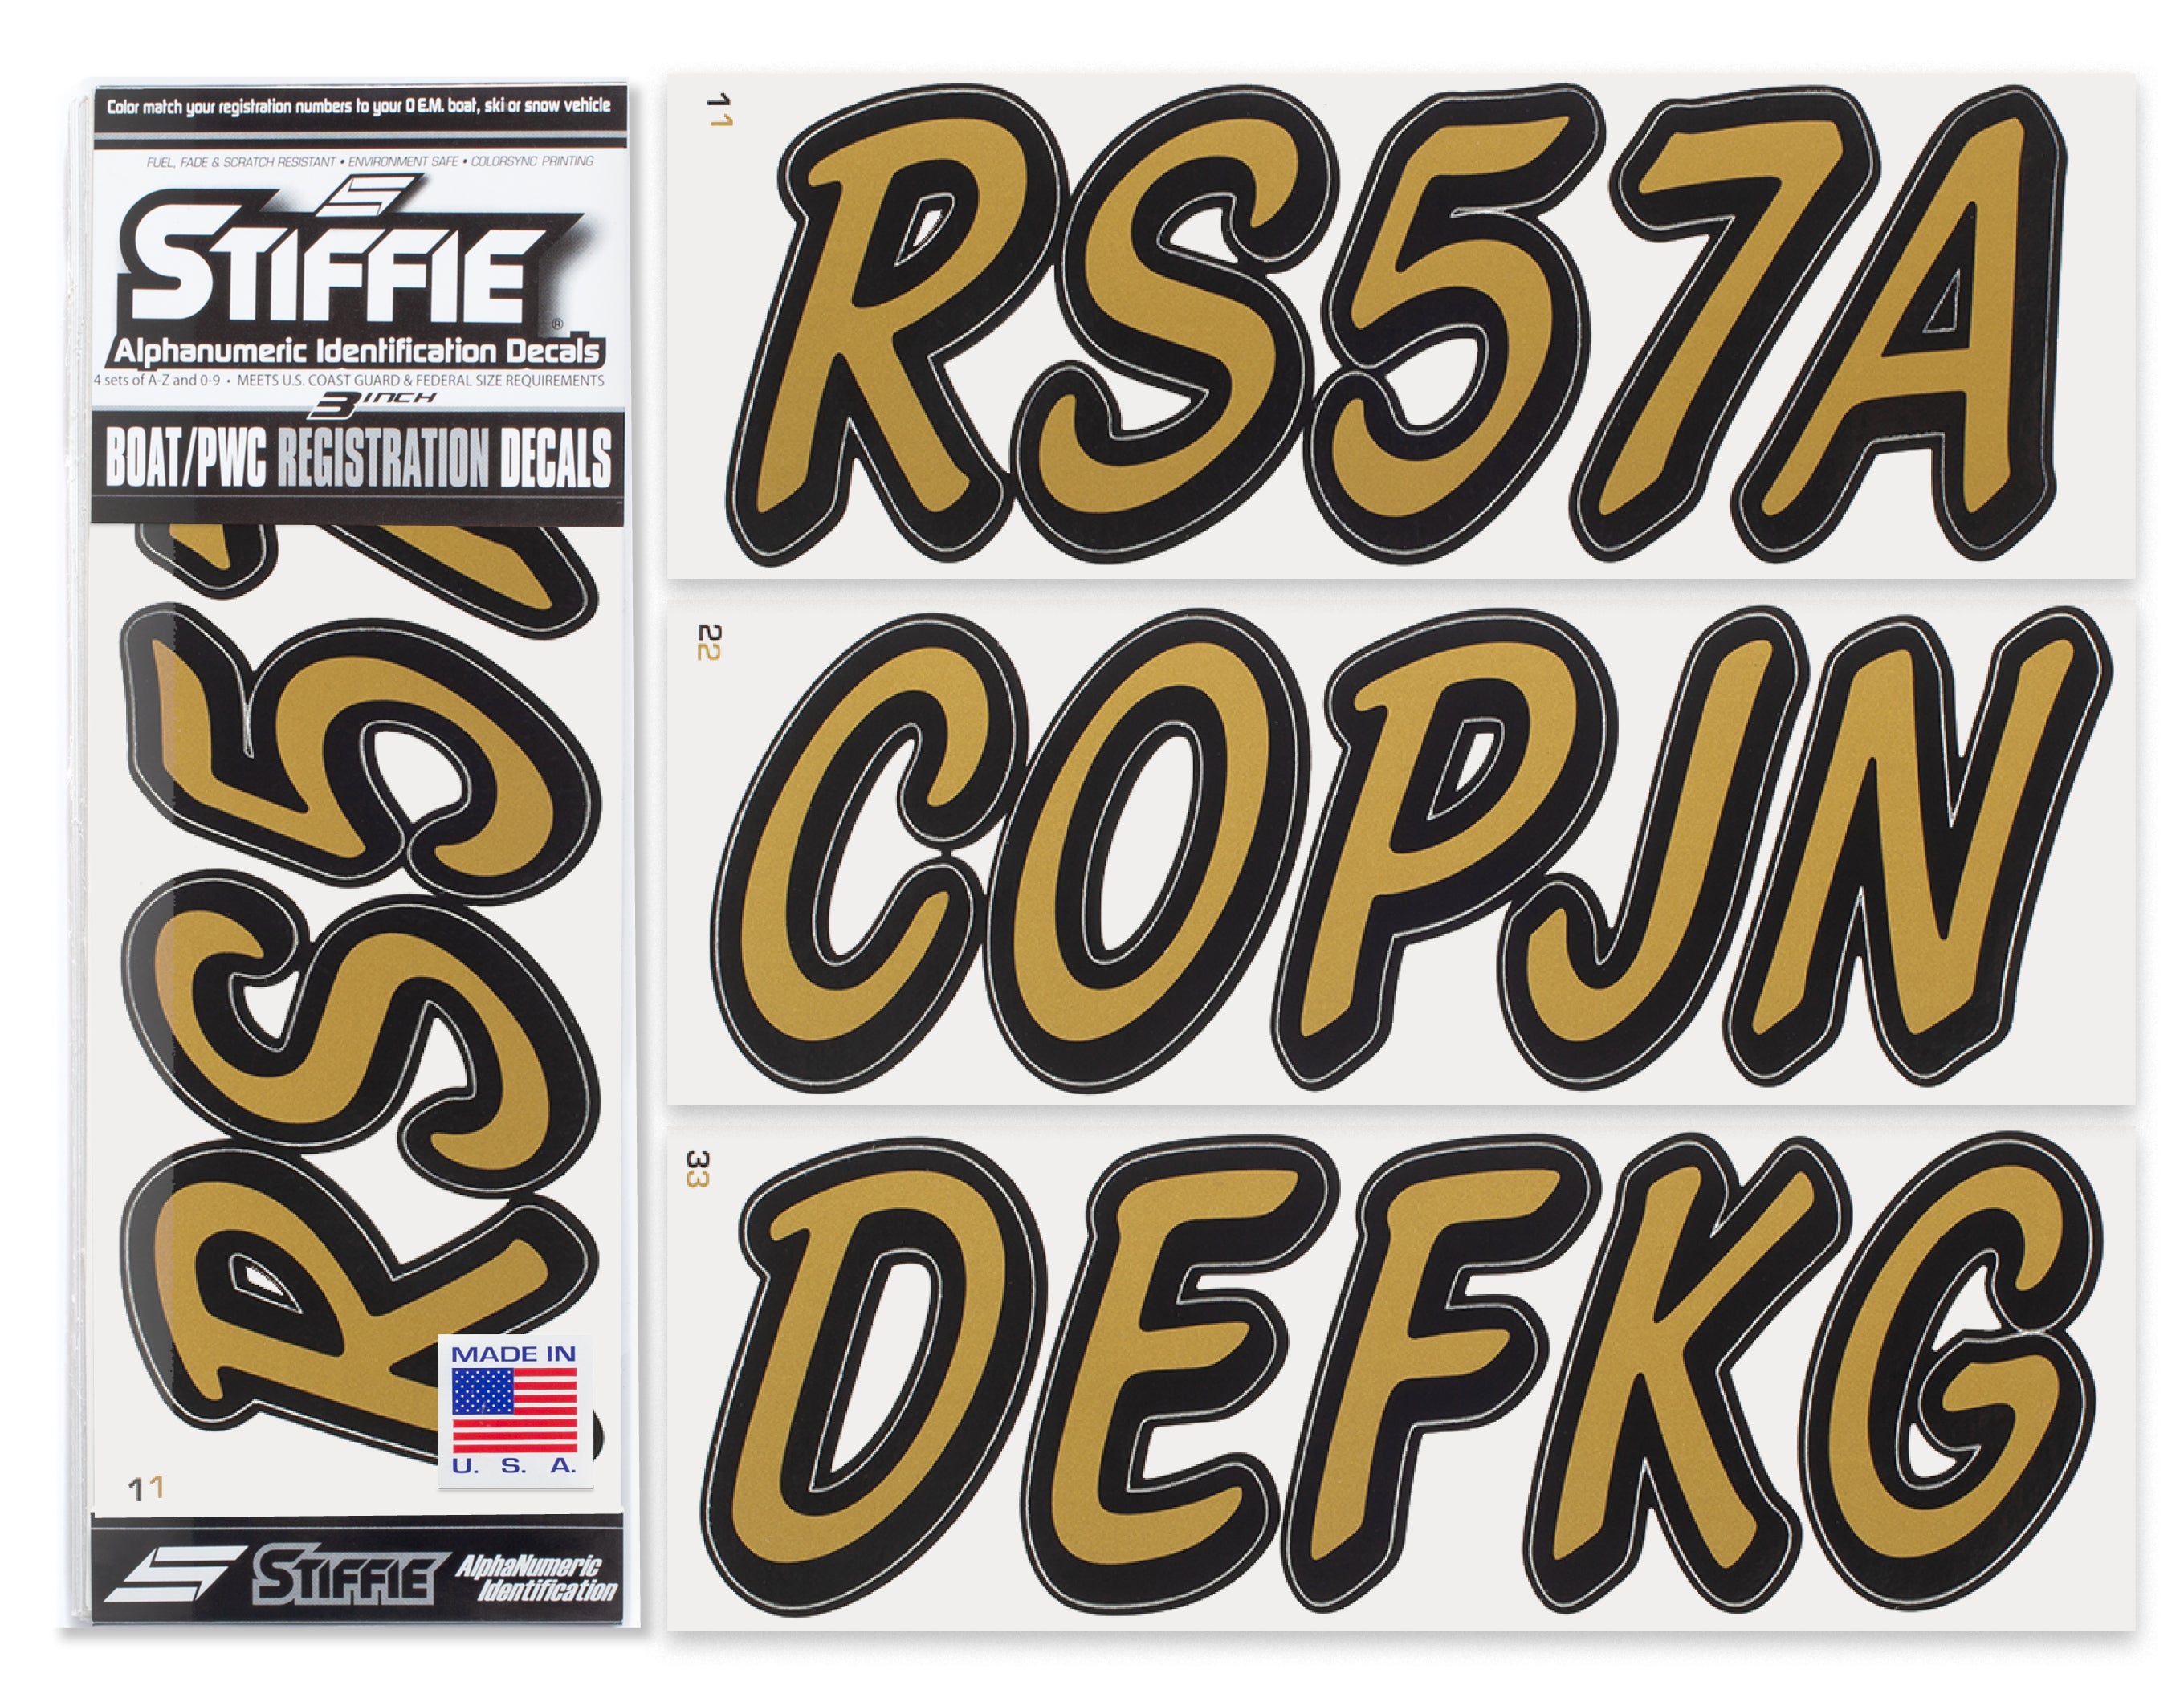 STIFFIE Whipline Solid Metallic Gold/Black 3" Alpha-Numeric Registration Identification Numbers Stickers Decals for Boats & Personal Watercraft